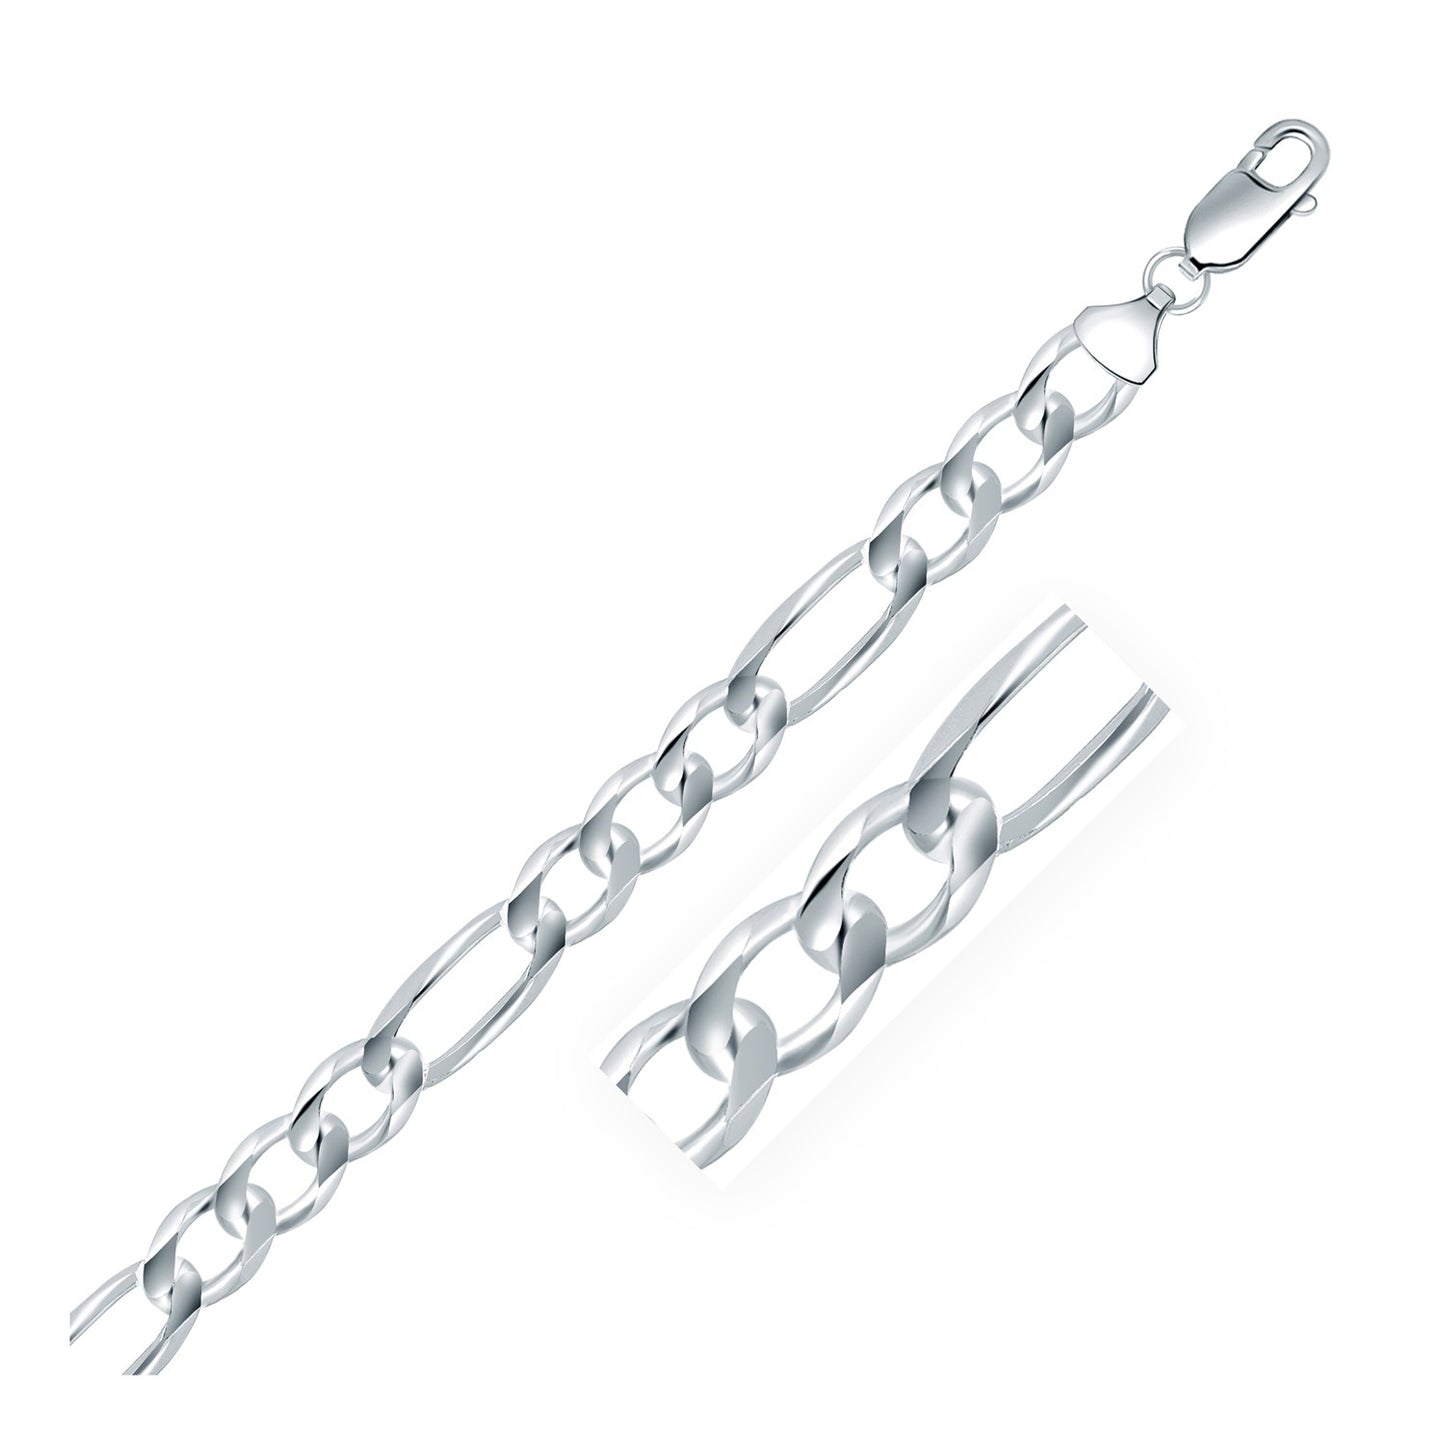 Rhodium Plated 8.8mm Sterling Silver Figaro Style Chain